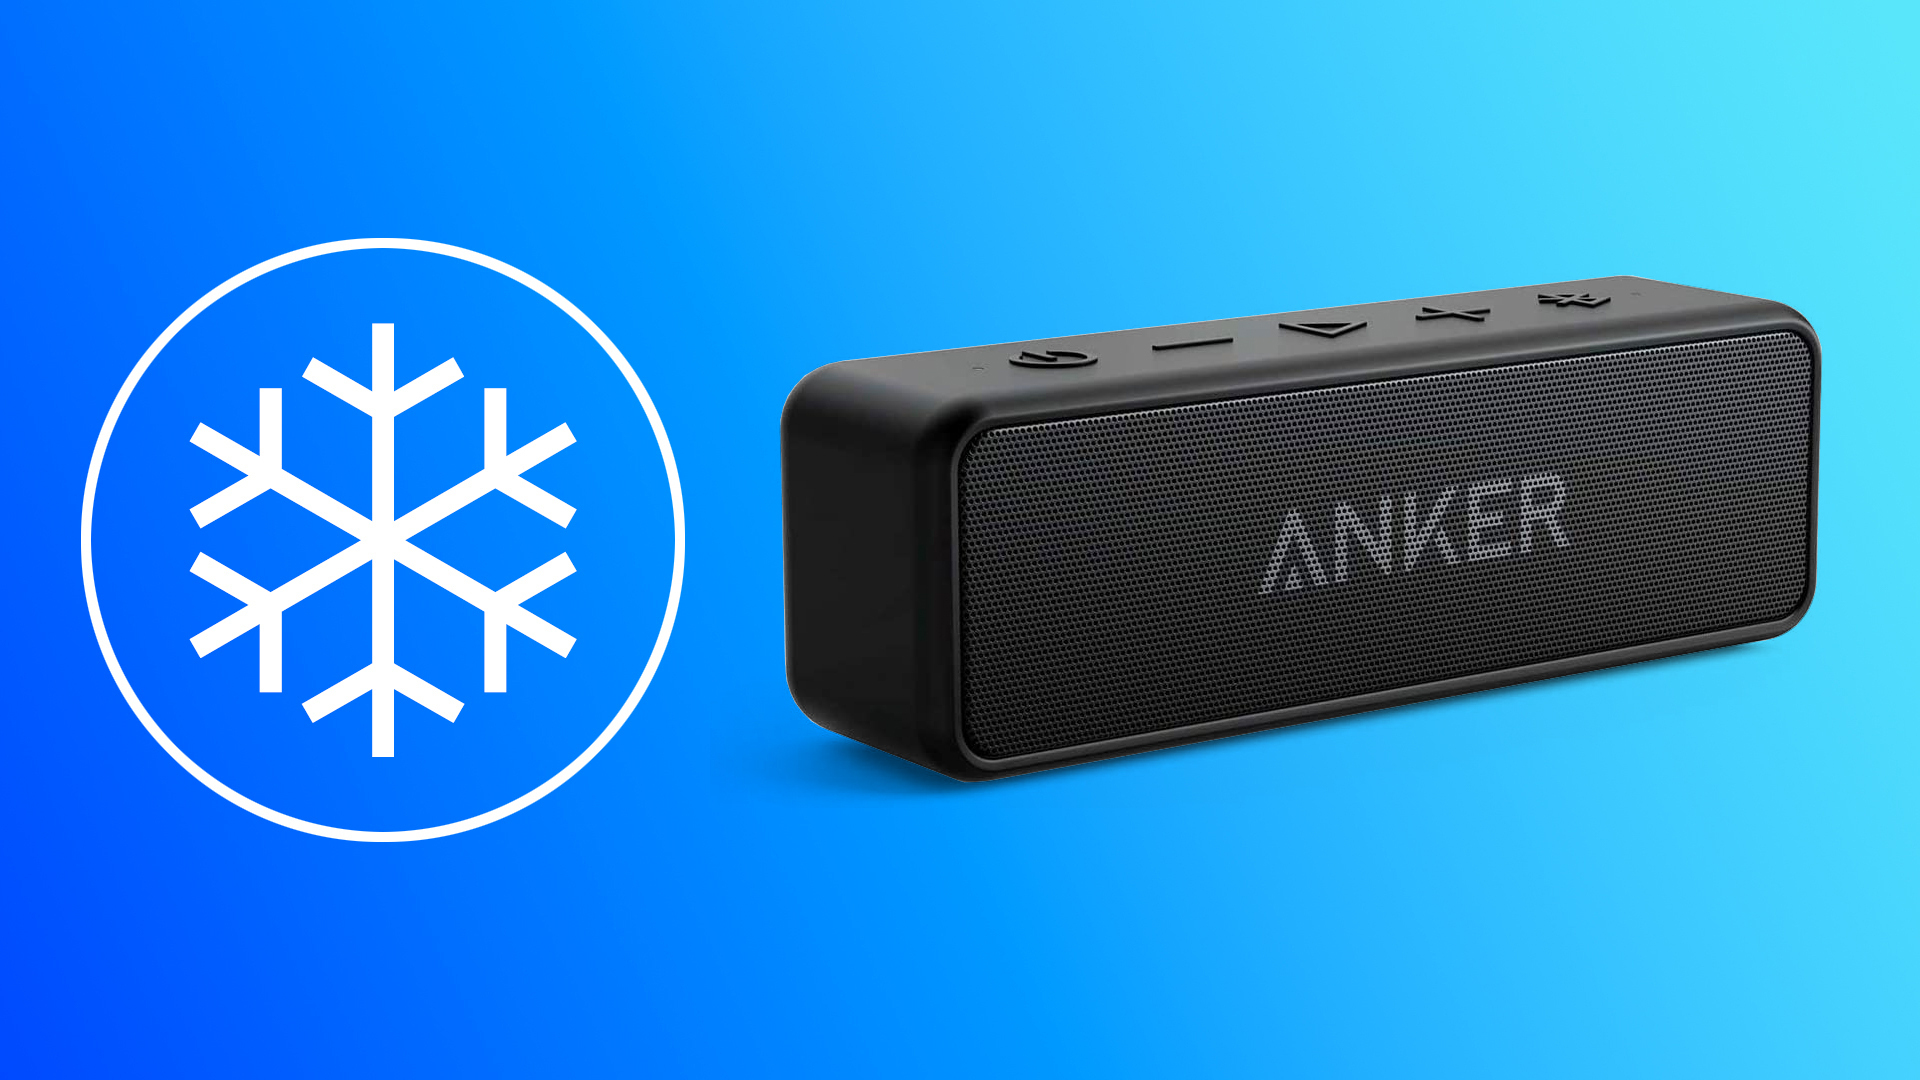 Anker Soundcore 2 on a blue background